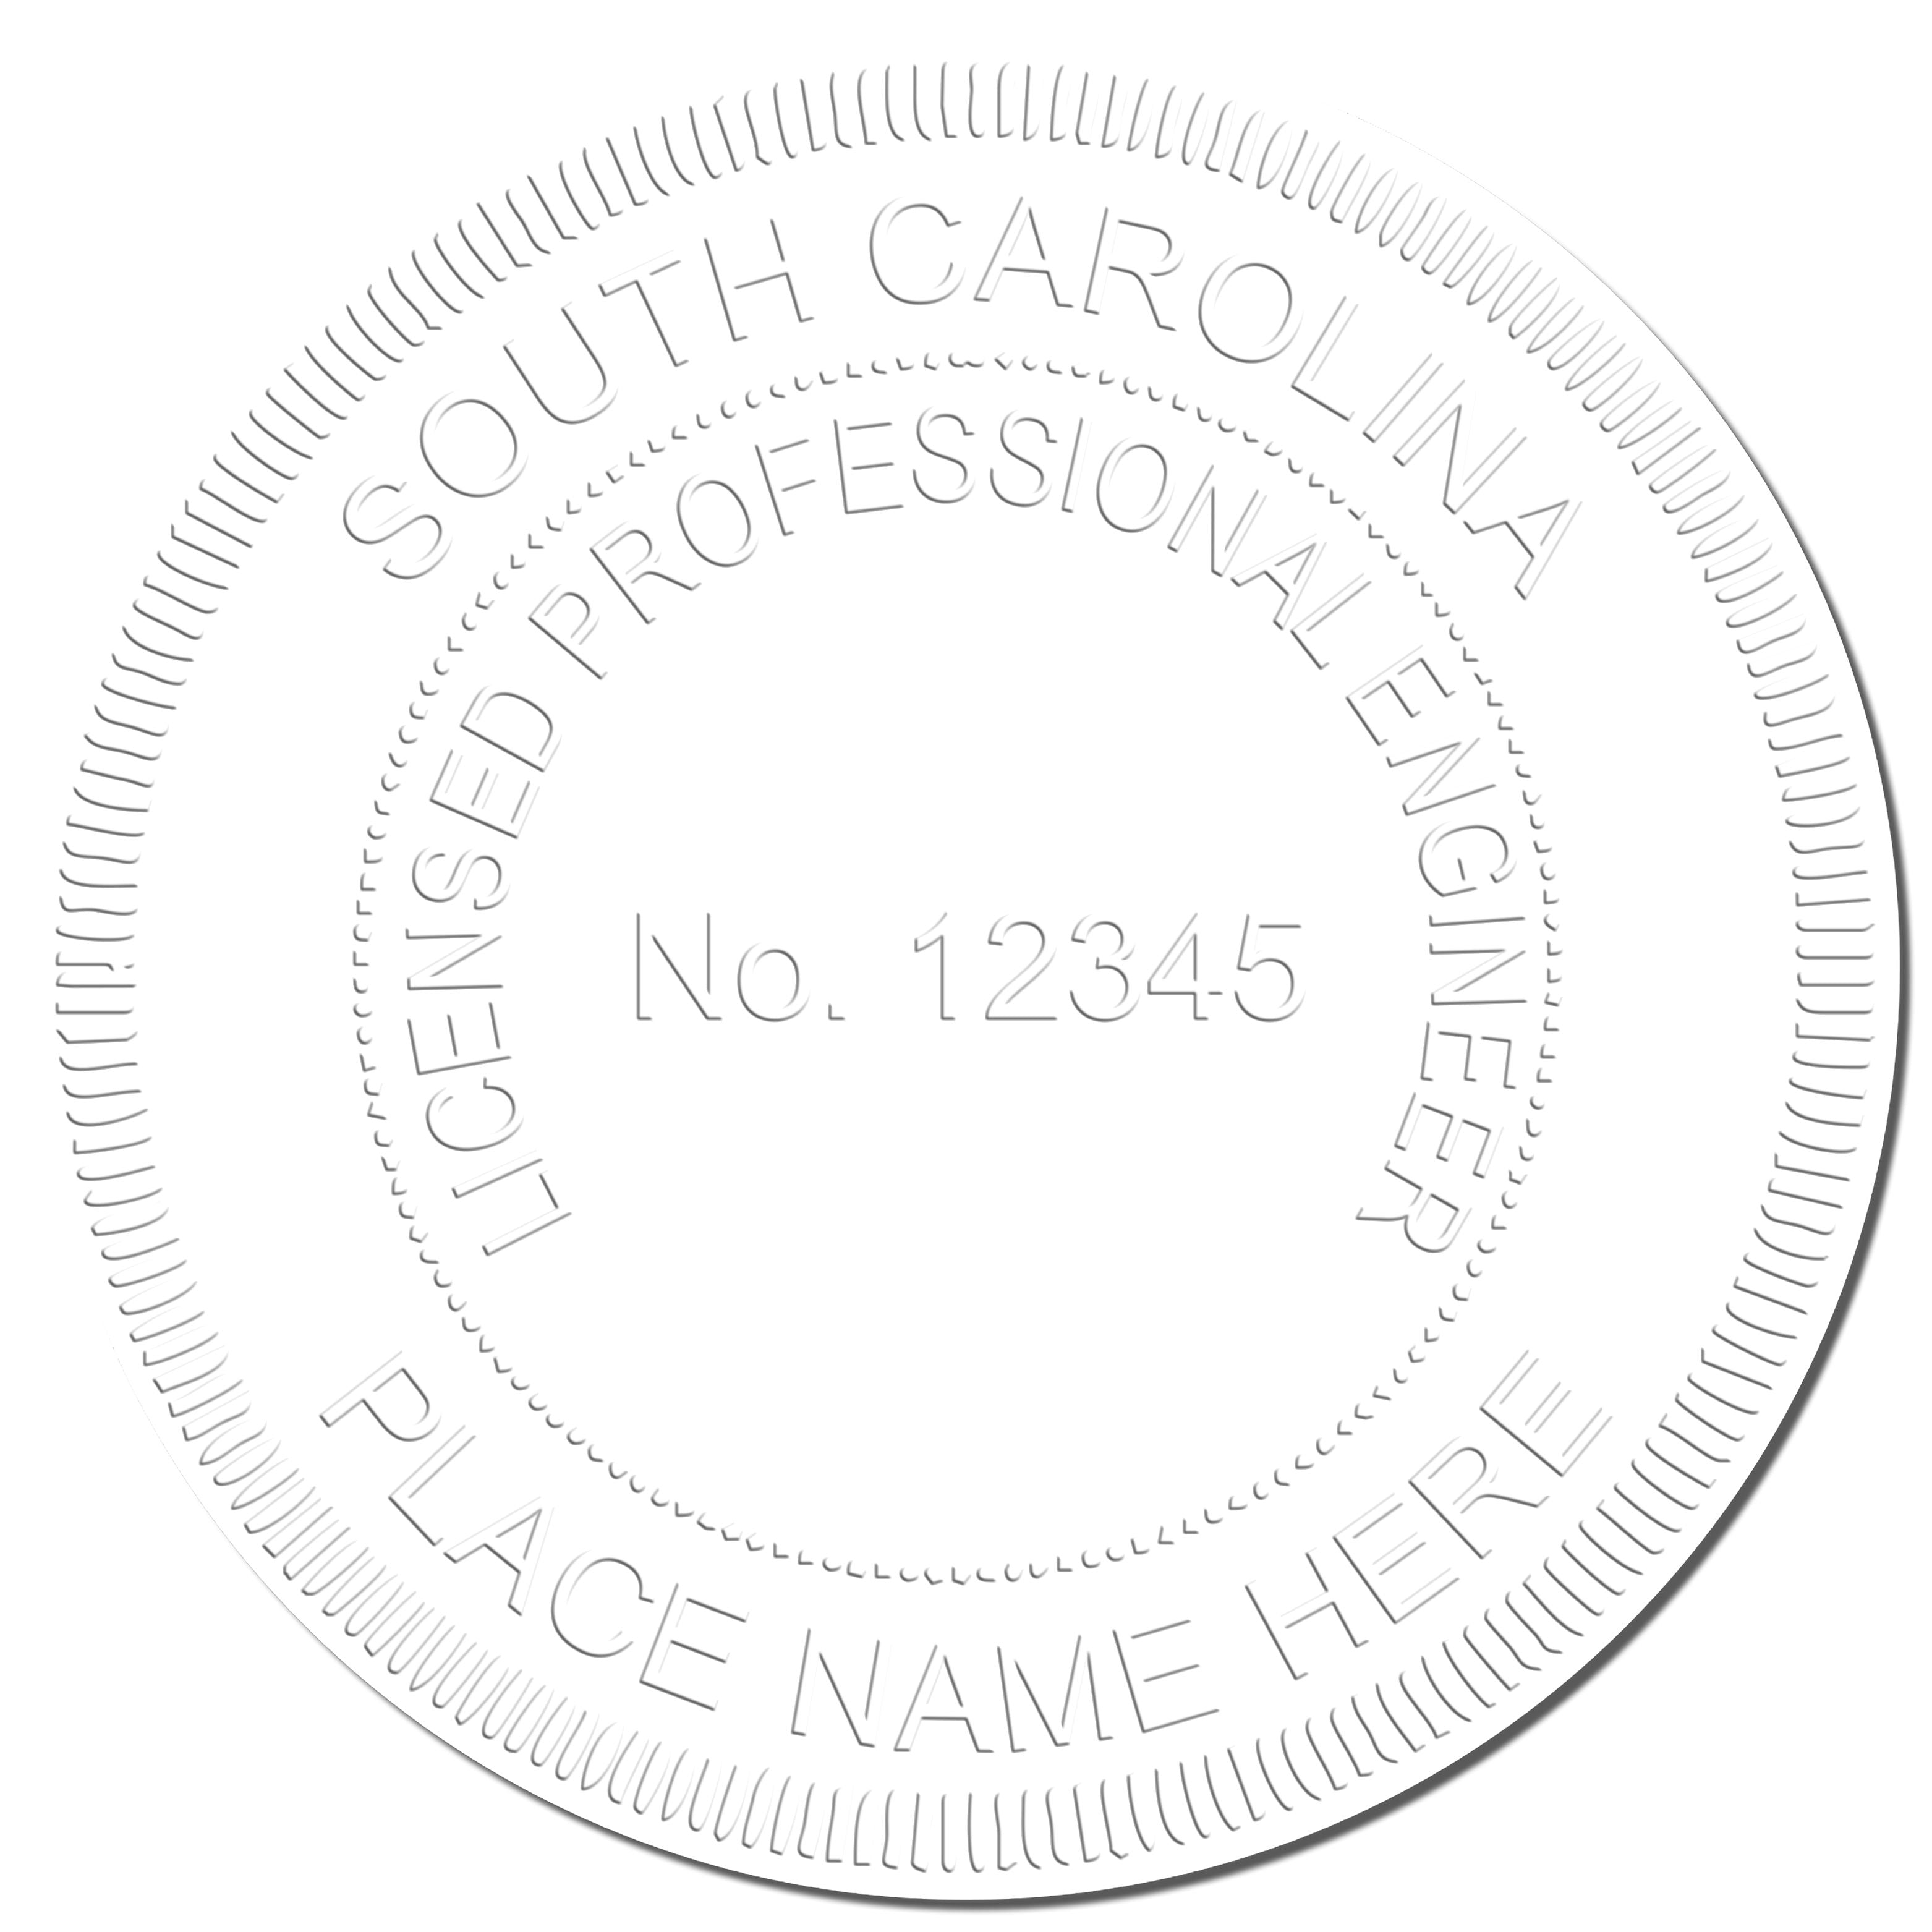 This paper is stamped with a sample imprint of the Gift South Carolina Engineer Seal, signifying its quality and reliability.